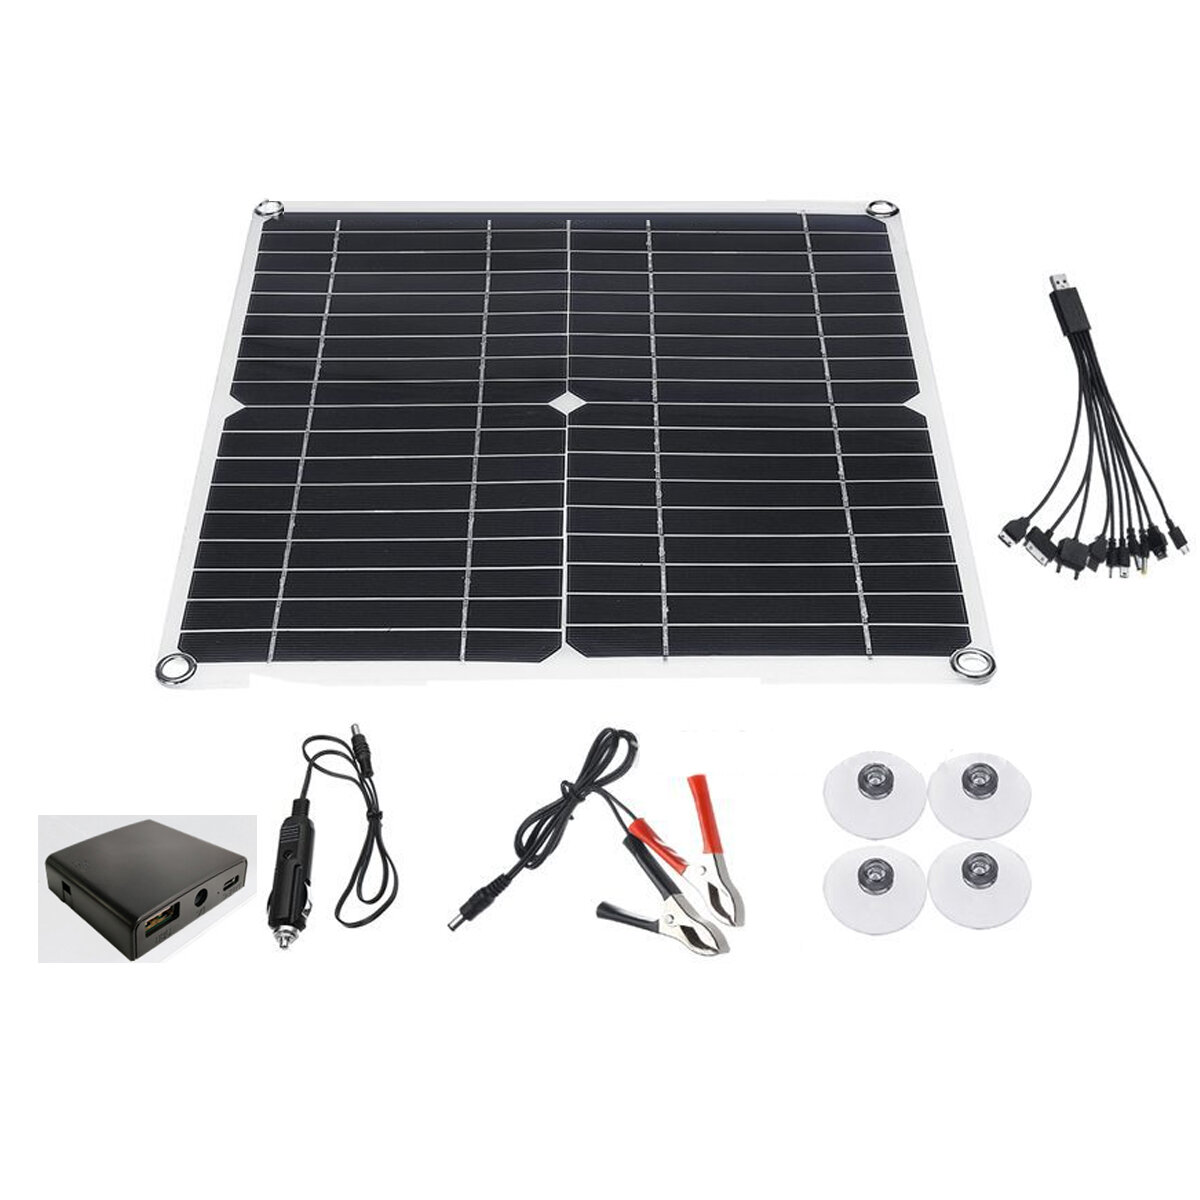 

80W 12V Monocrystalline Solar Panel Charge Controller W/ Dual USB for Camping